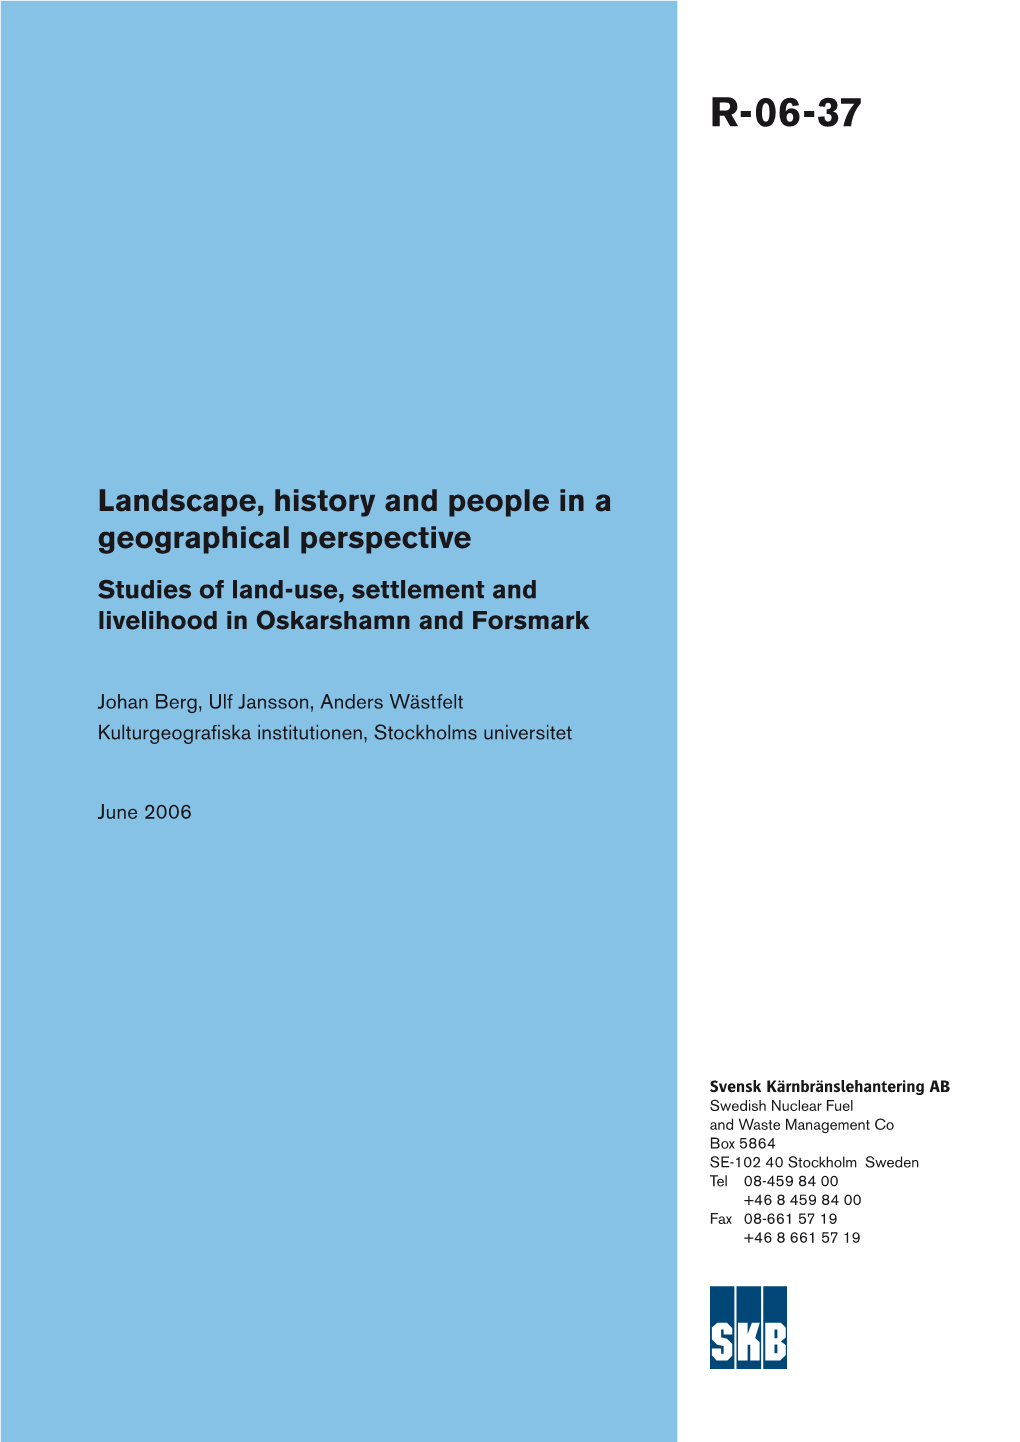 Landscape, History and People in Geographical Perspective